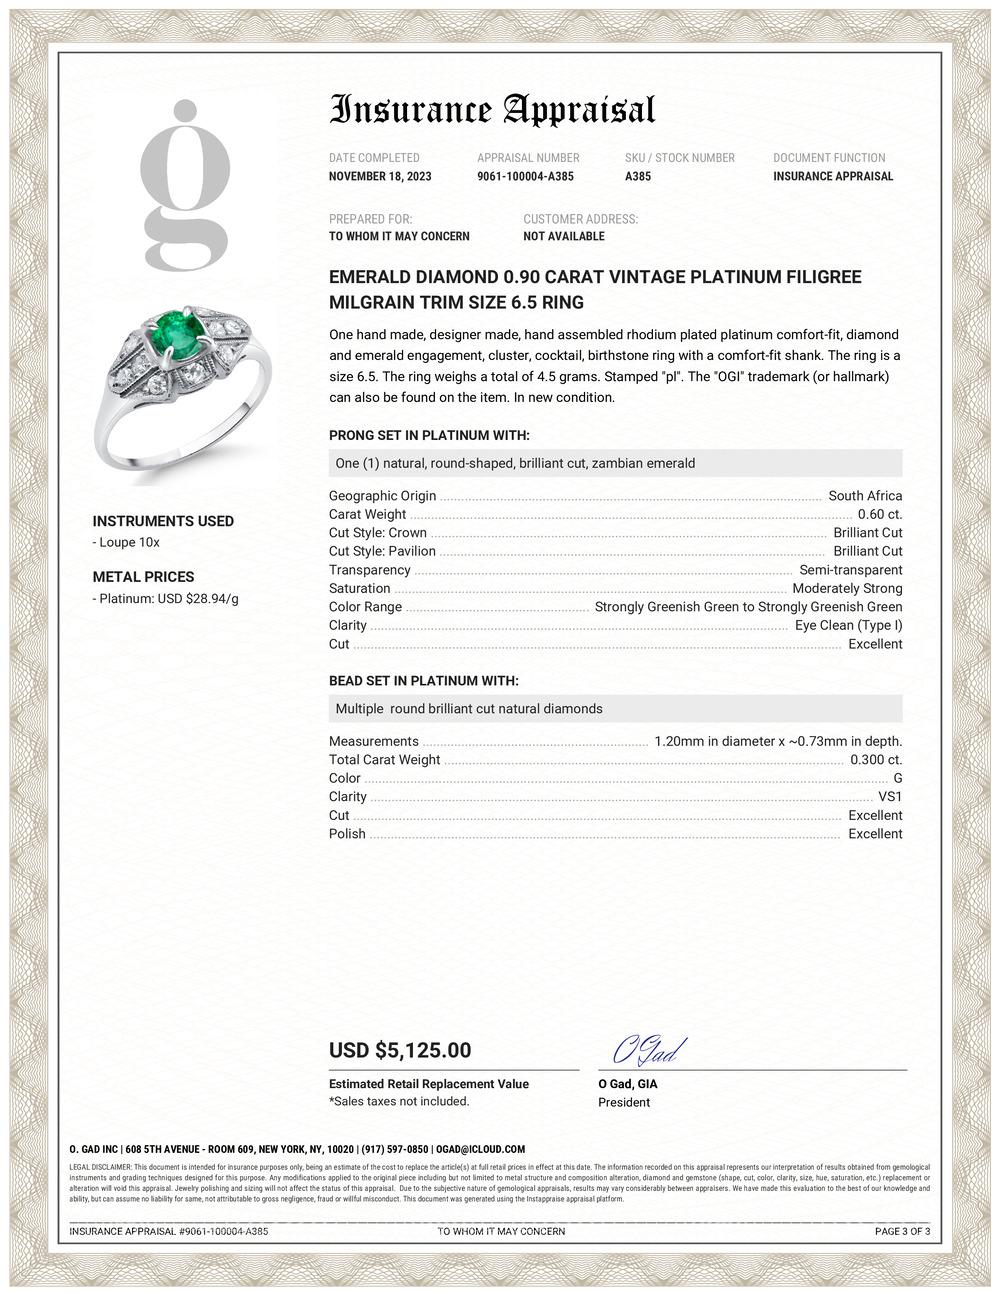 Introducing the Emerald Diamond 0.90 Carat Platinum Filigree Milgrain Trim Engagement Ring, finger size 6.5 – a timeless symbol of your love and commitment. This exquisite piece combines classic elegance with intricate details, making it the perfect